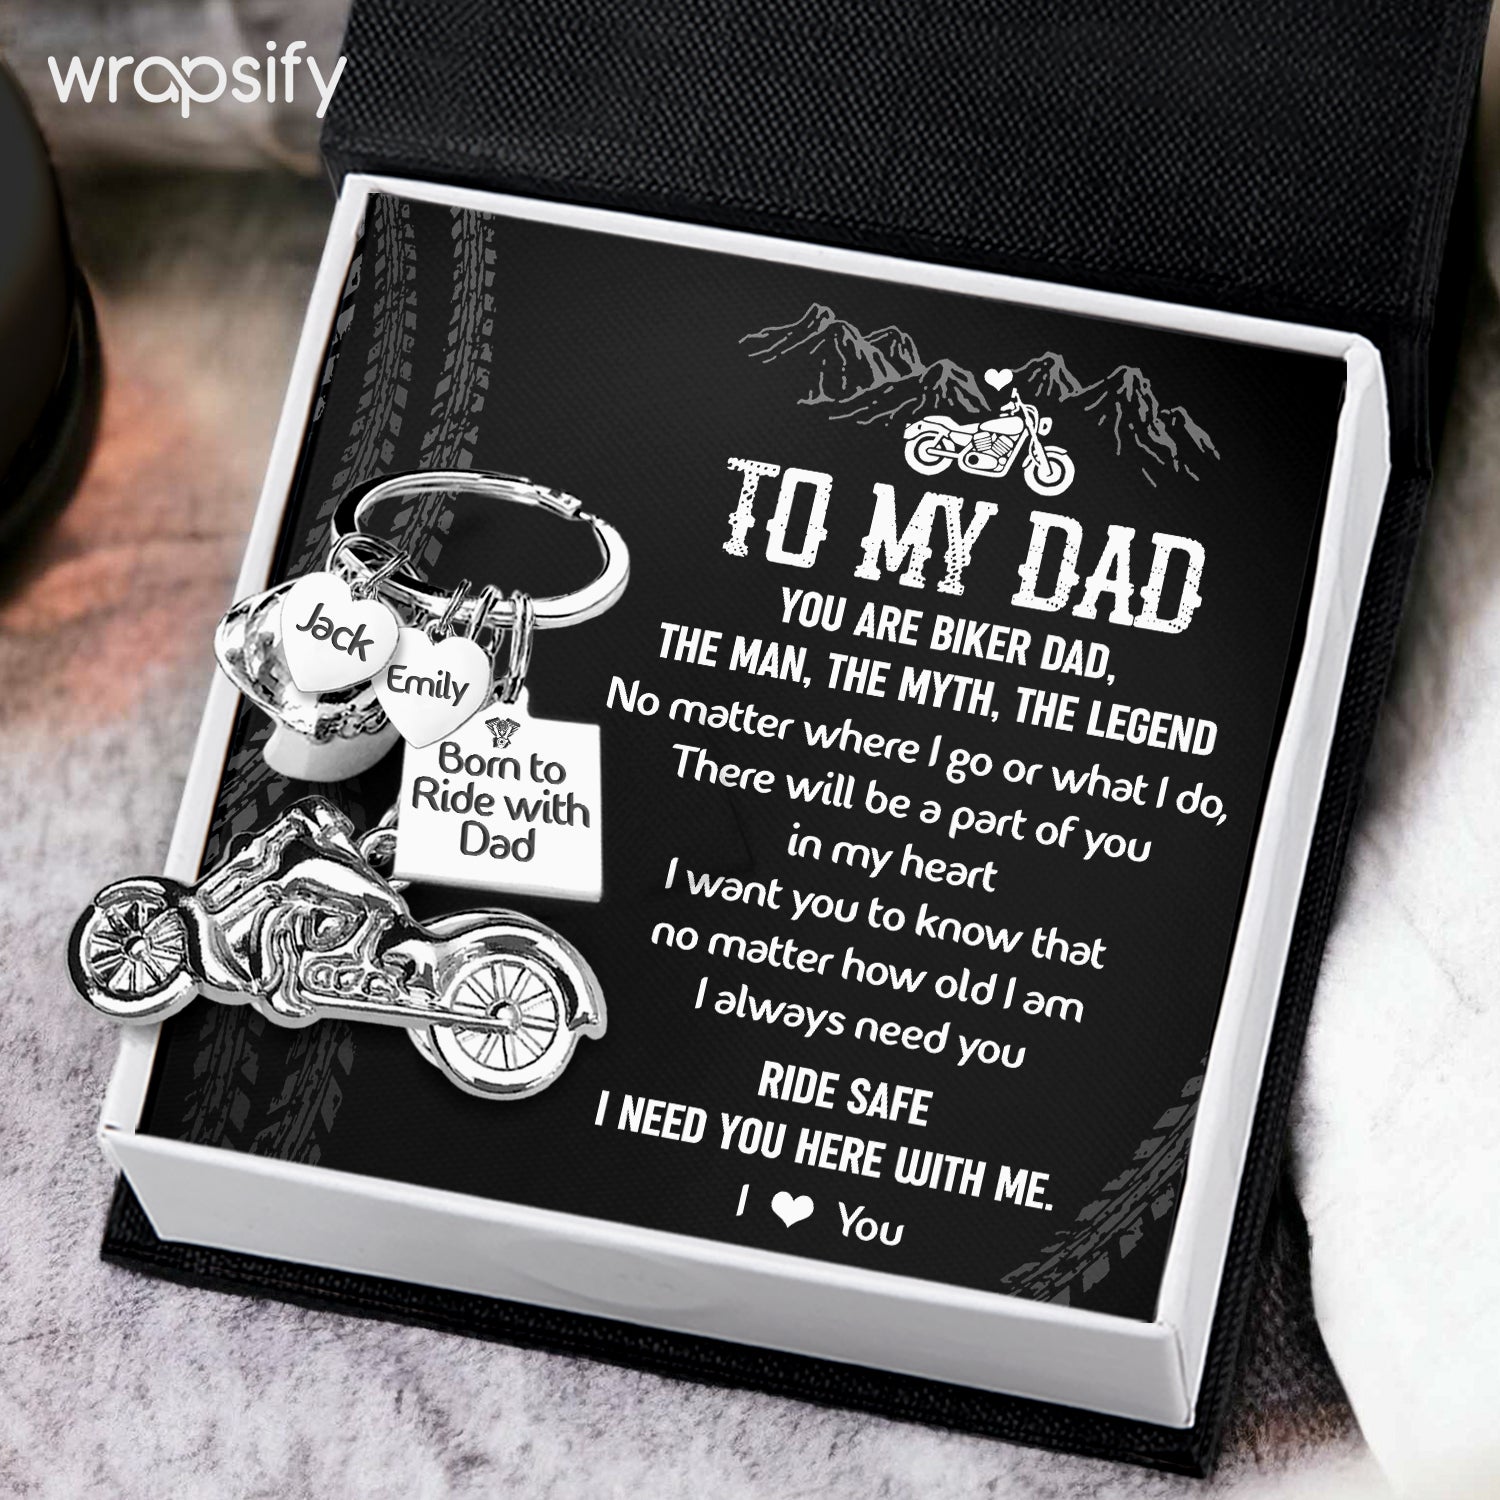 Personalized Classic Bike Keychain - Biker - To My Dad - The Man, The Myth, The Legend - Gkt18019